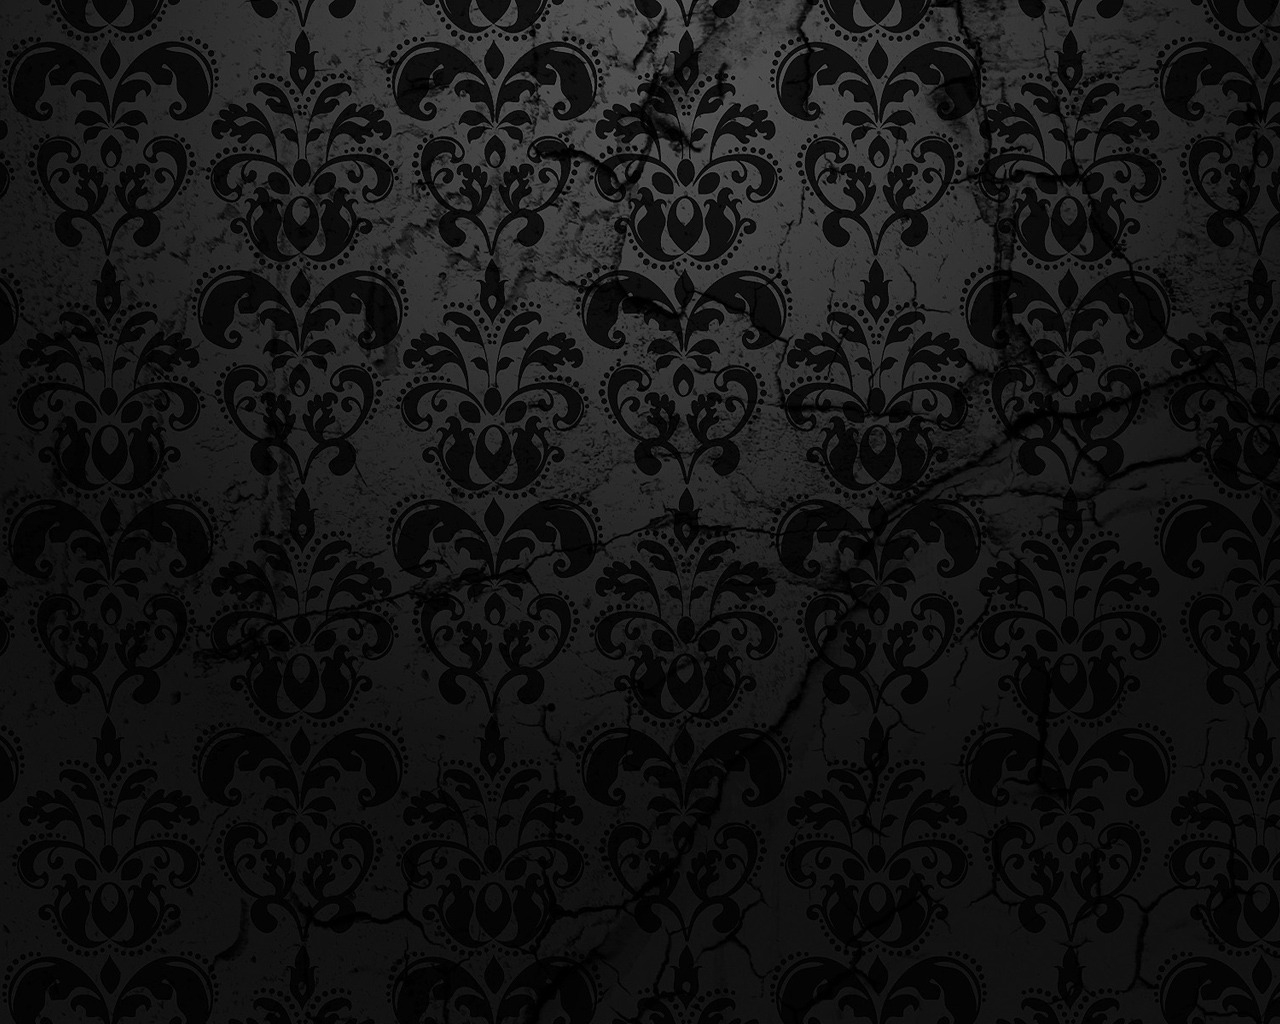 Damask for 1280 x 1024 resolution